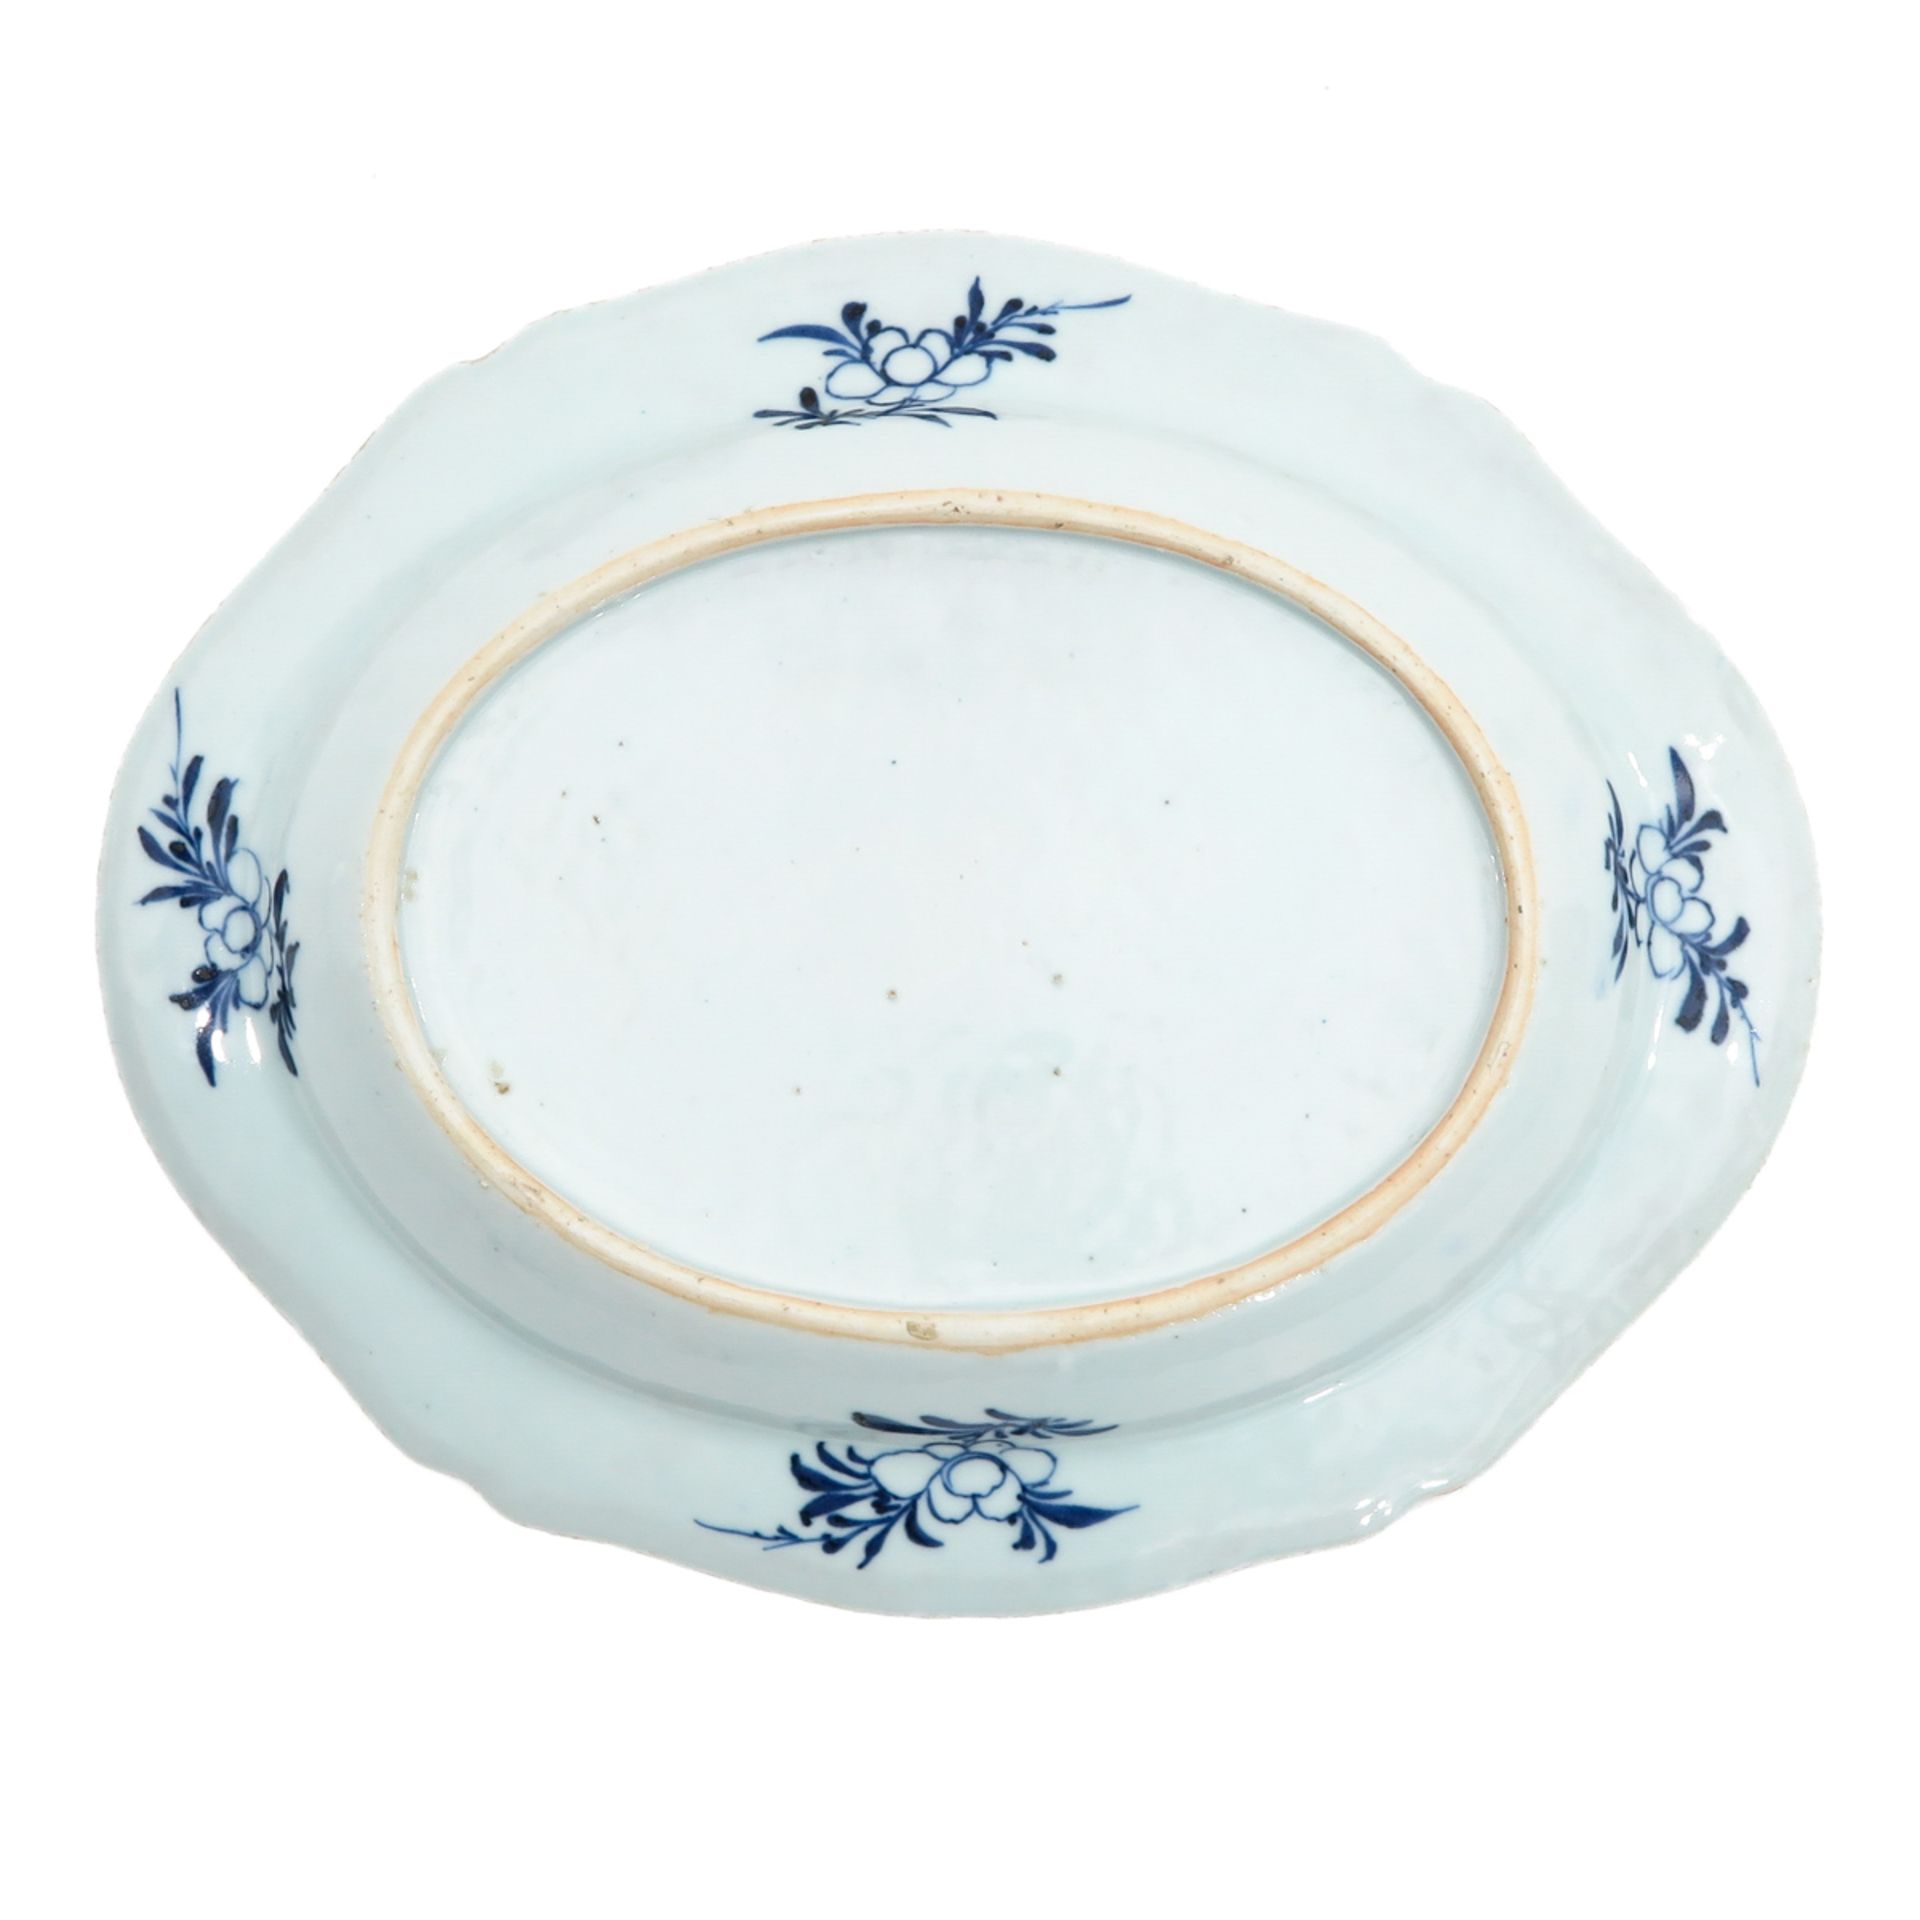 A Pair of Blue and White Serving Trays - Image 6 of 9